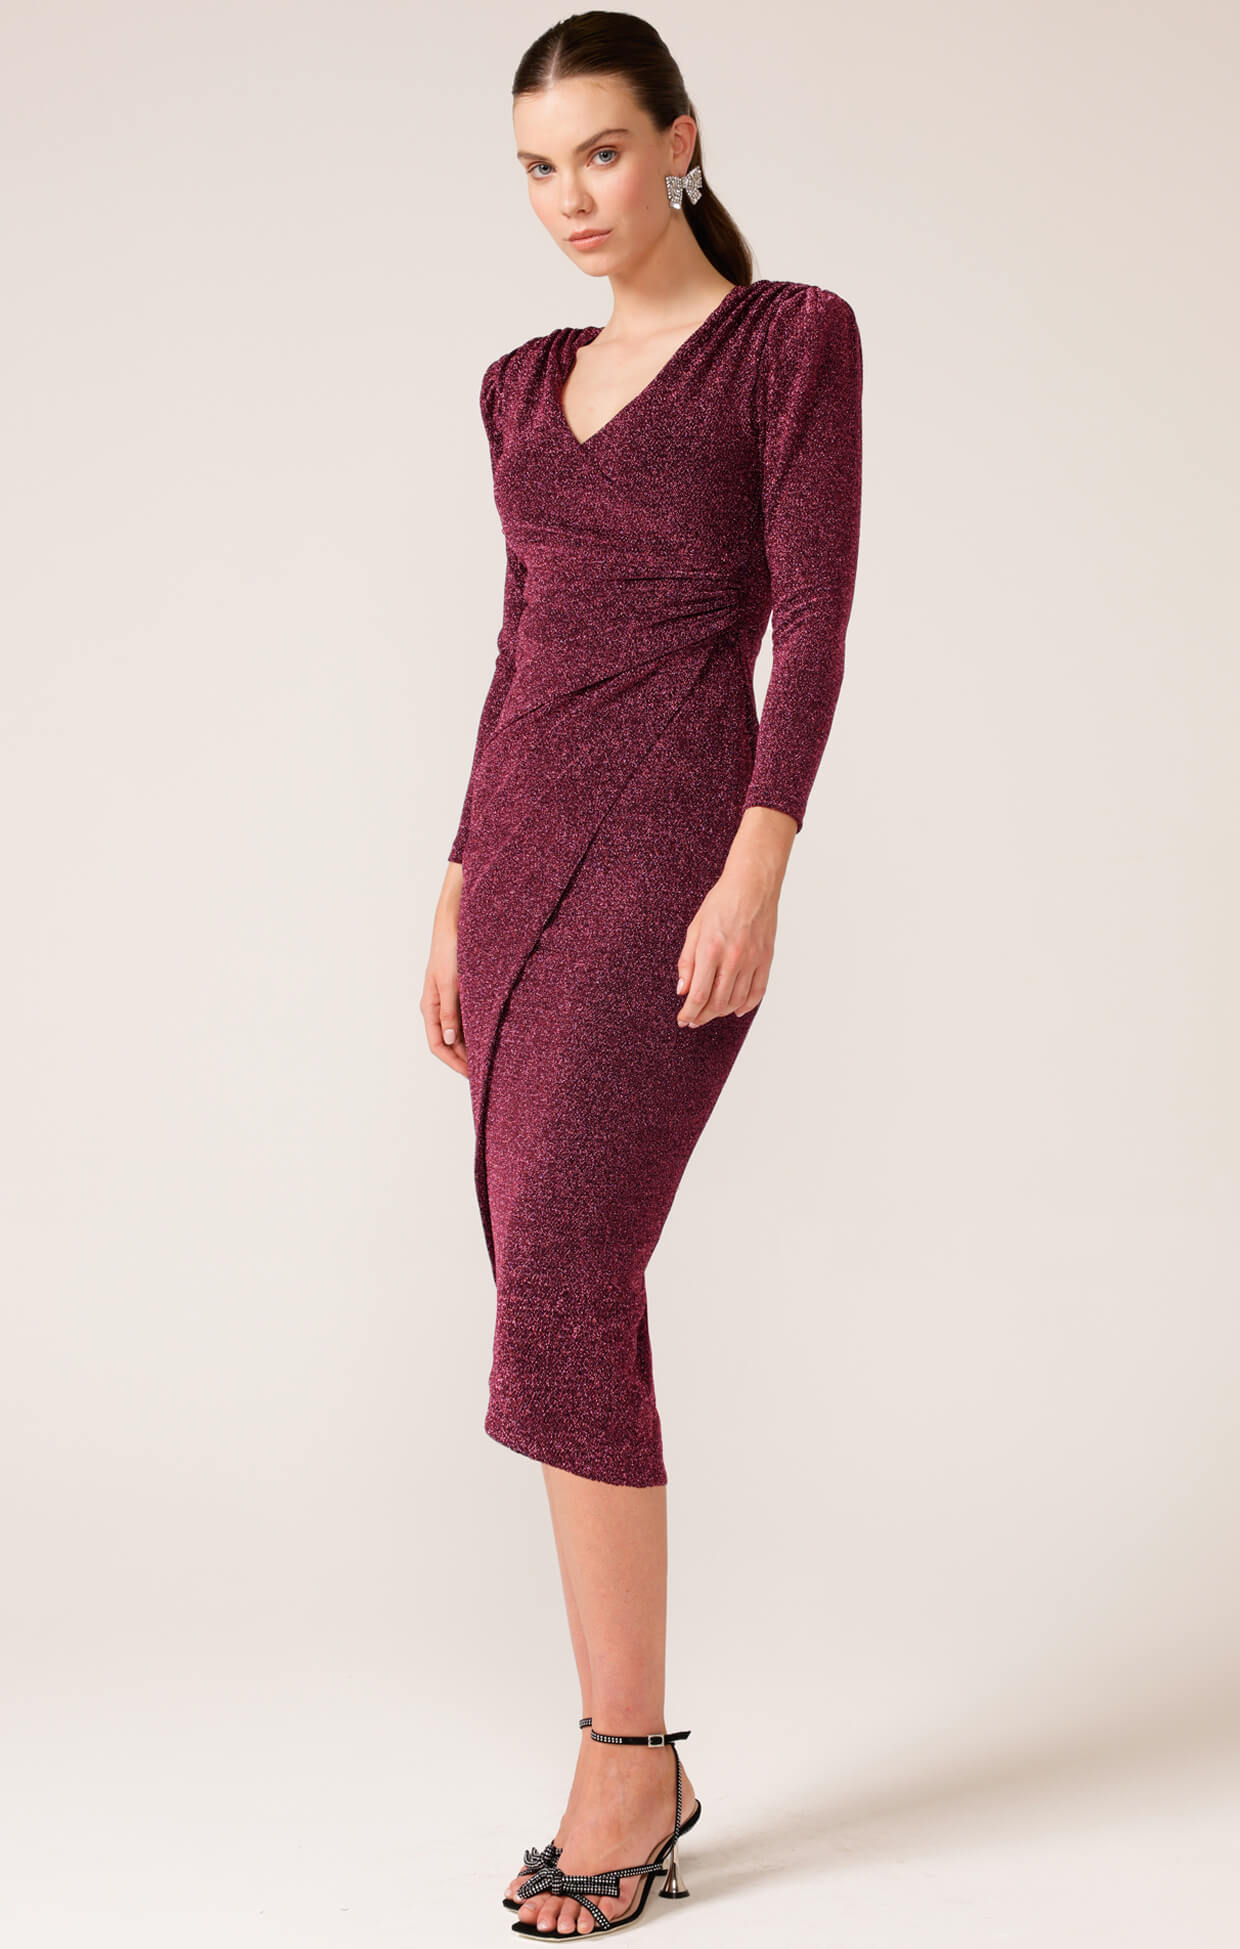 Soiree Sparkle Dress - Dusty Rose Lure